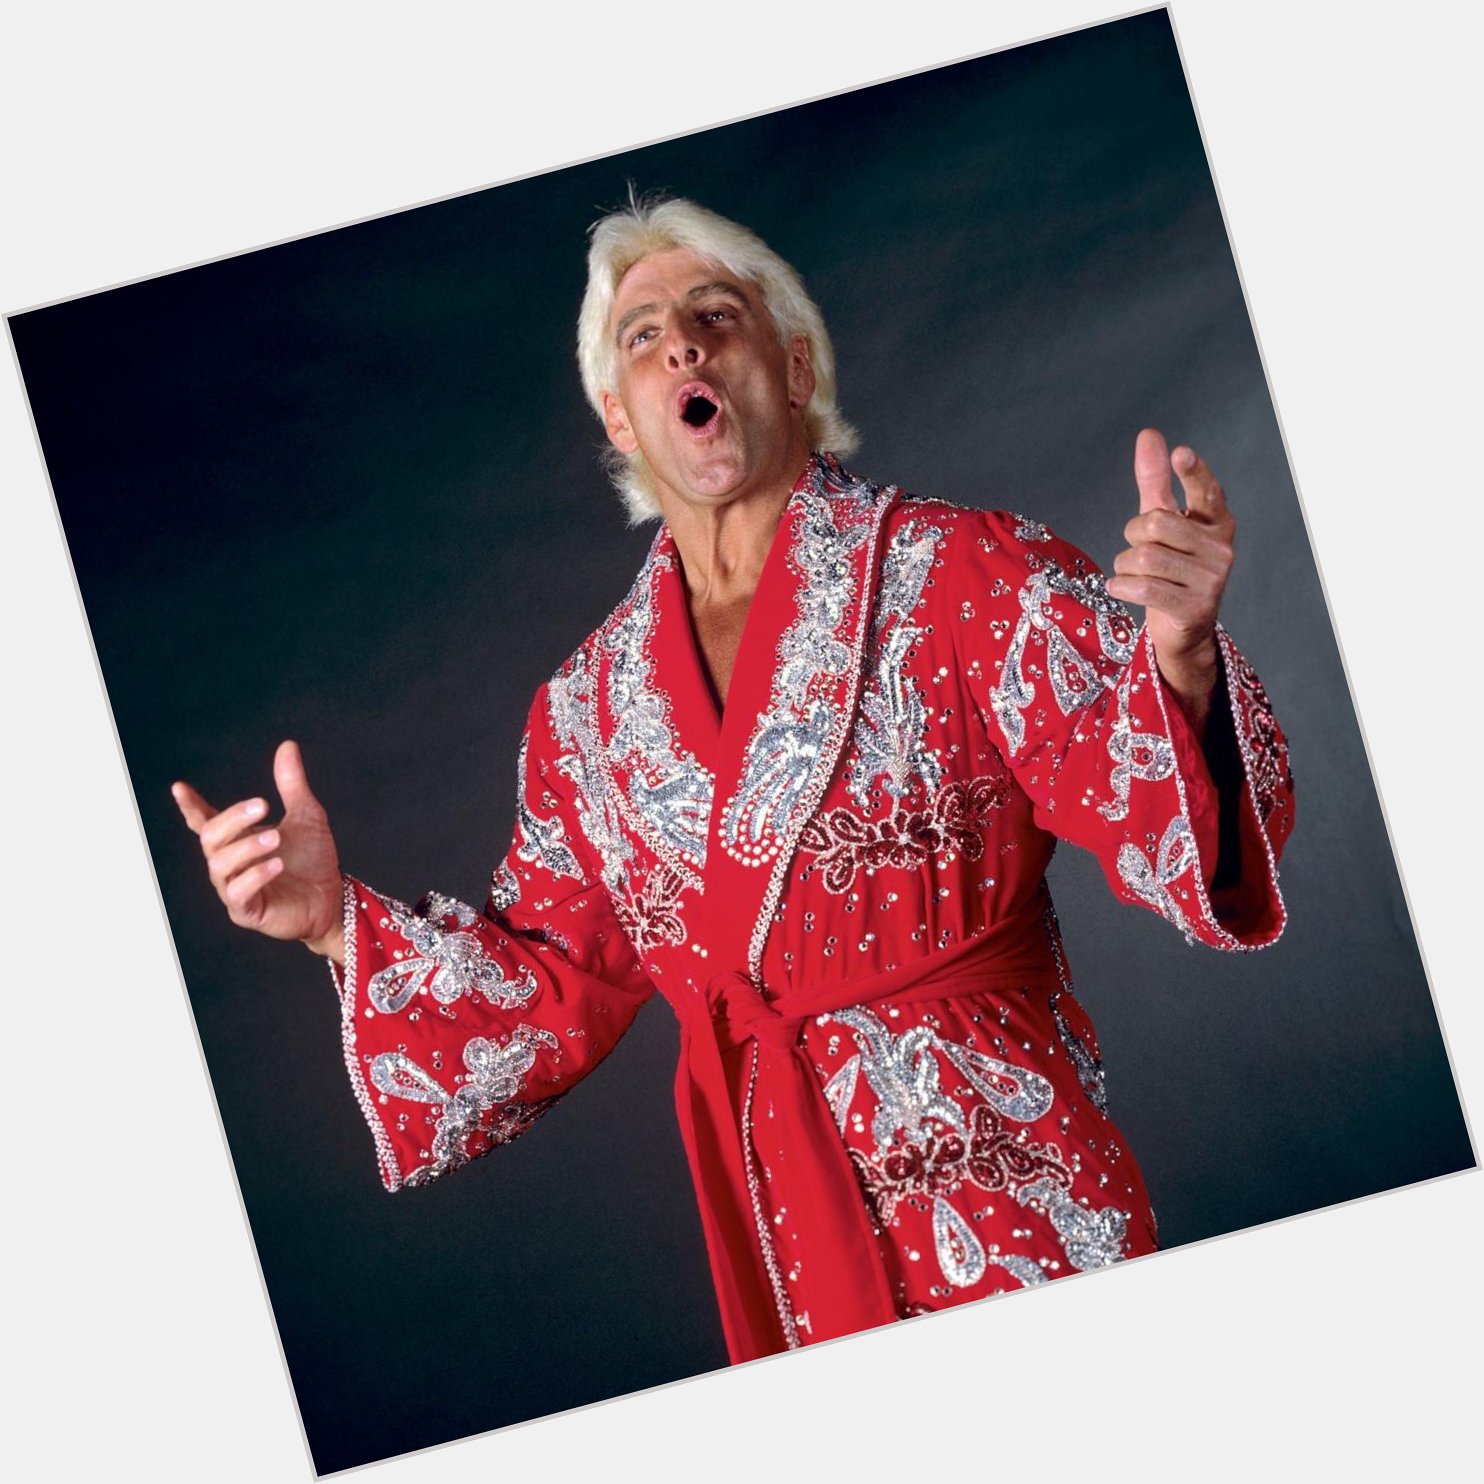 Happy birthday to the Nature Boy, Ric Flair! 